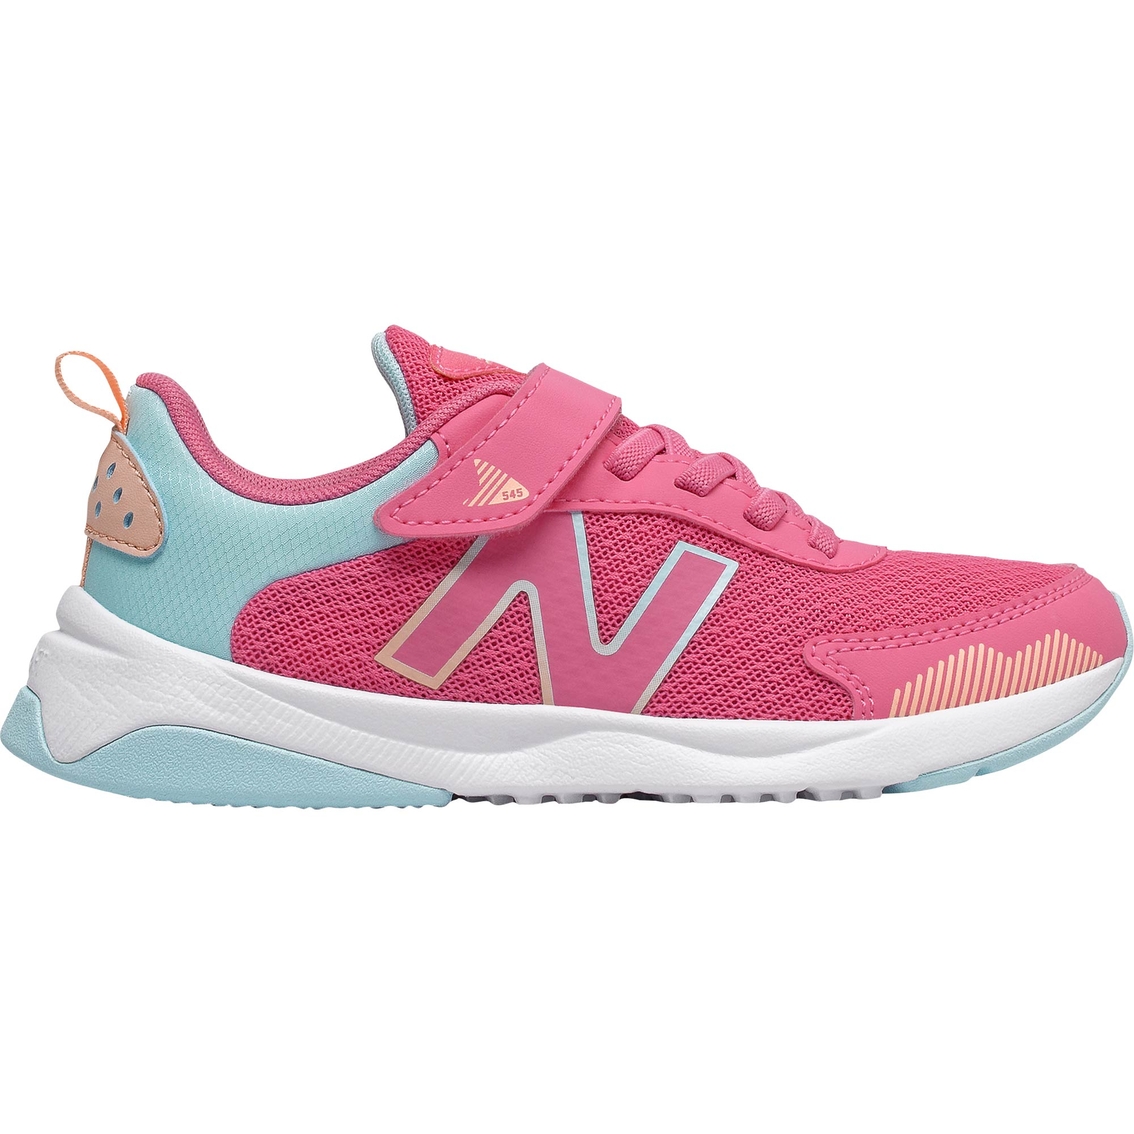 New Balance Preschool Girls Pt545po1 Running Shoes | Sneakers | Shoes ...